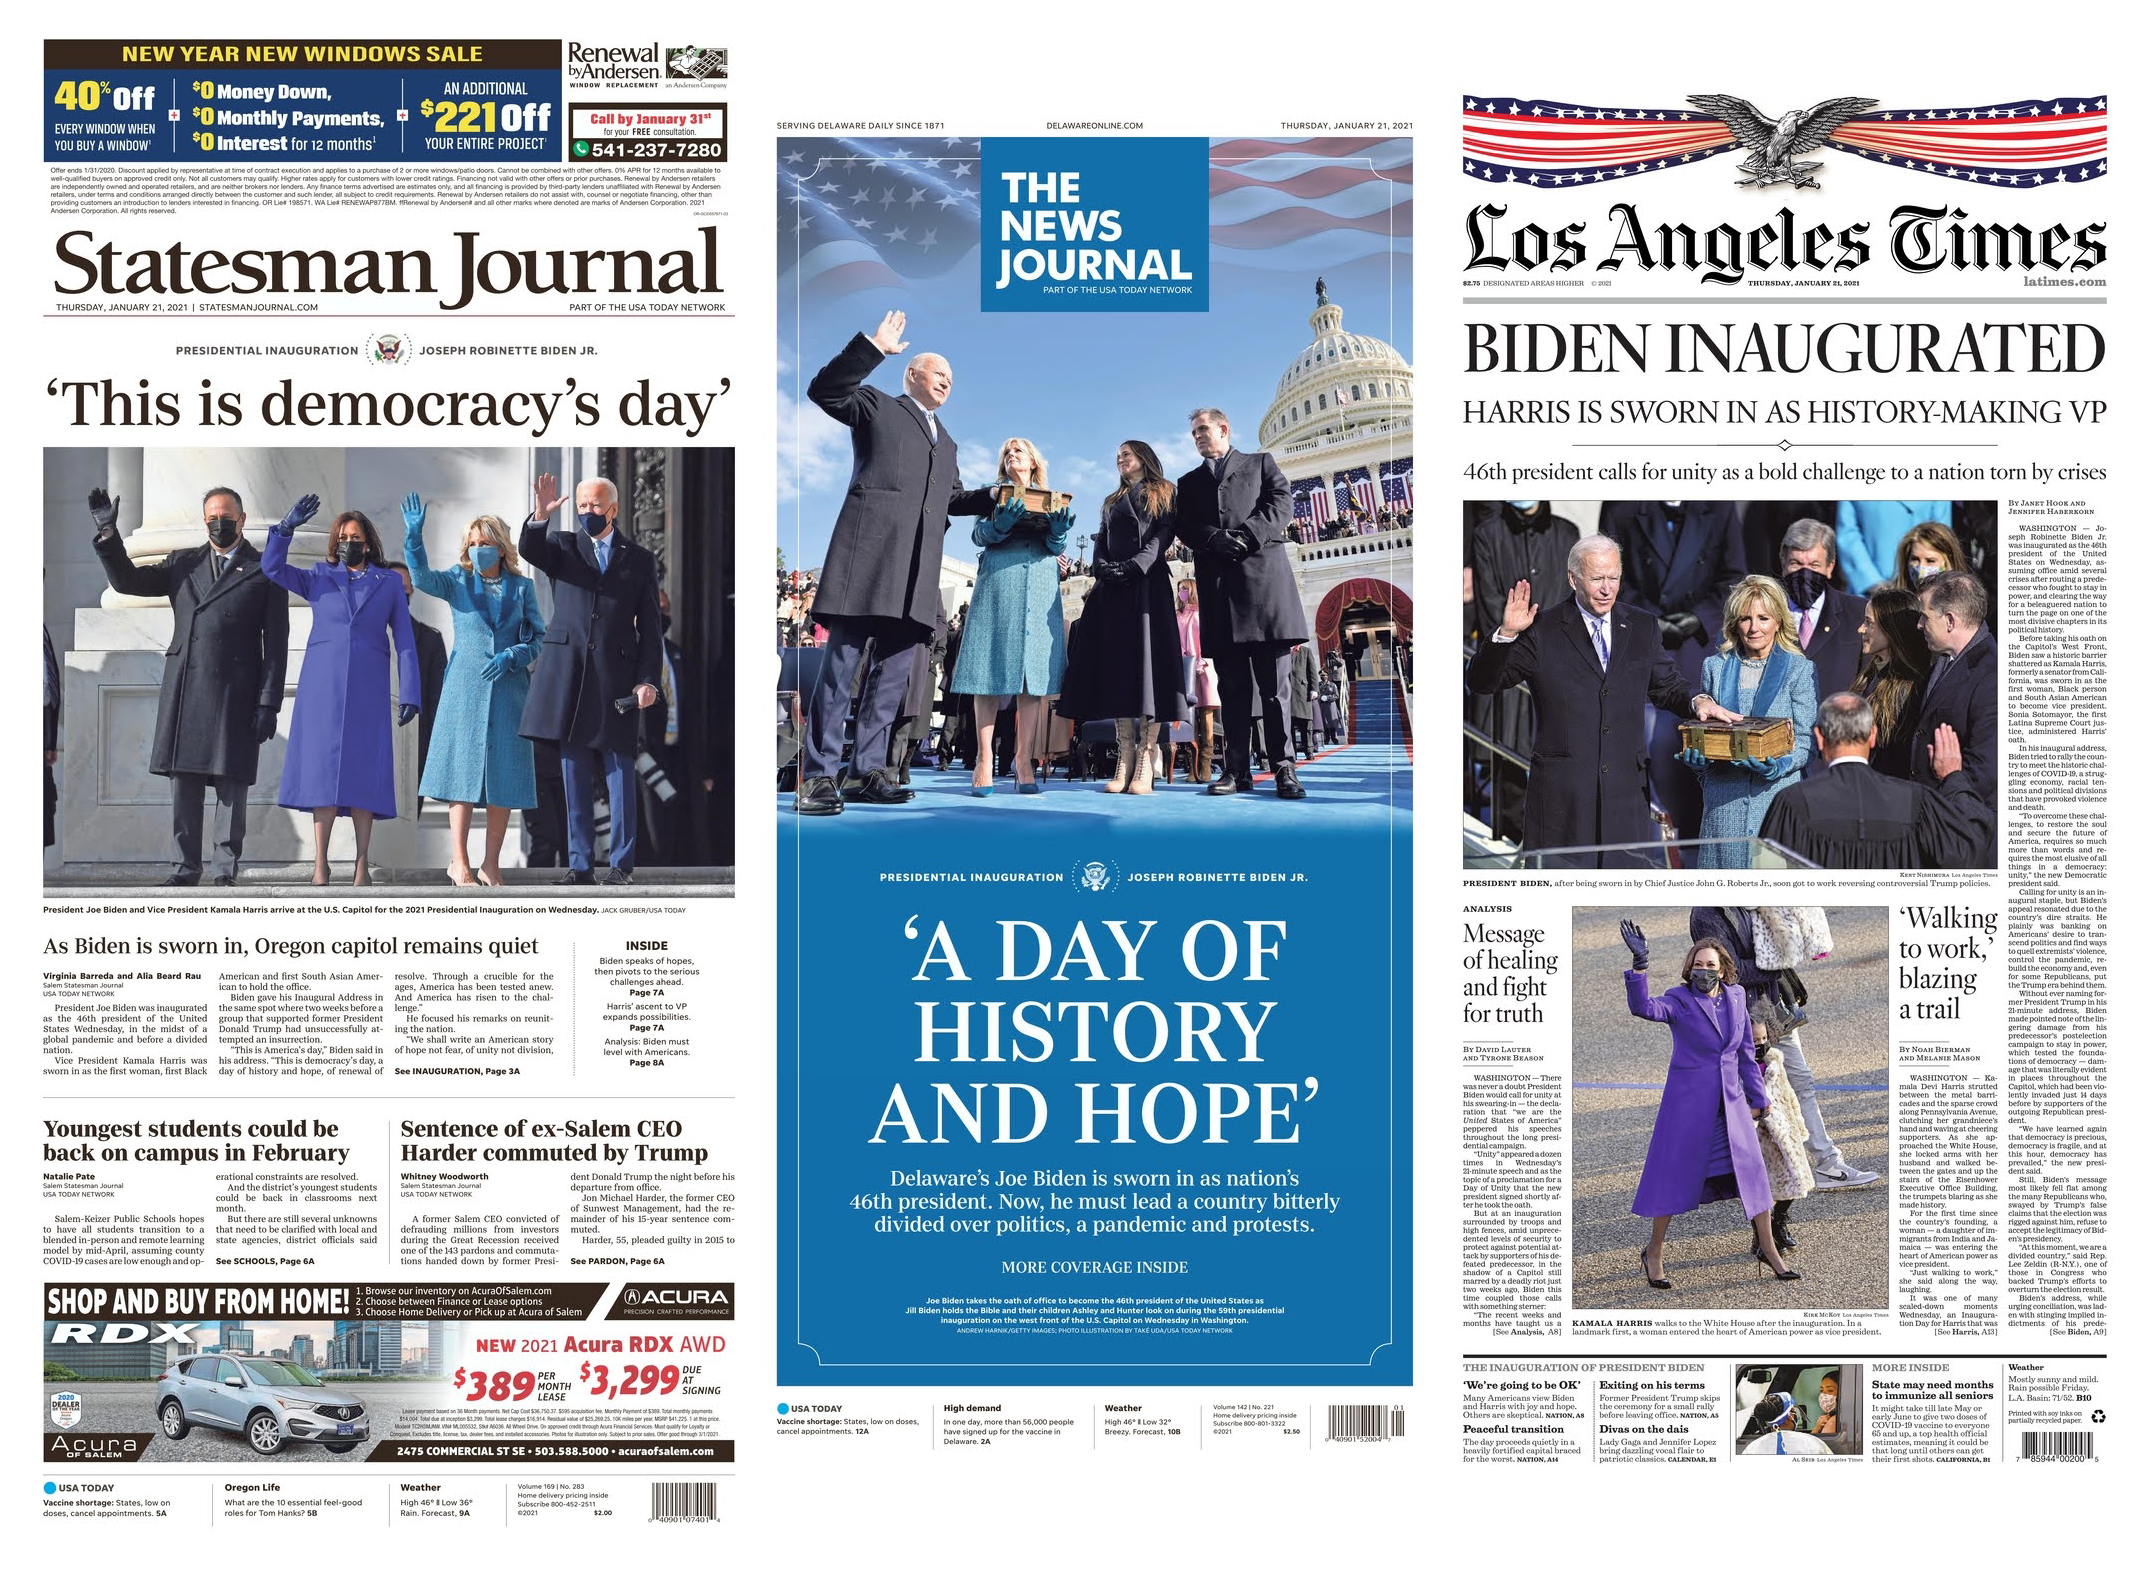 Inauguration Day Front Pages Had A Chance To Break Ground Most Didn T Poynter